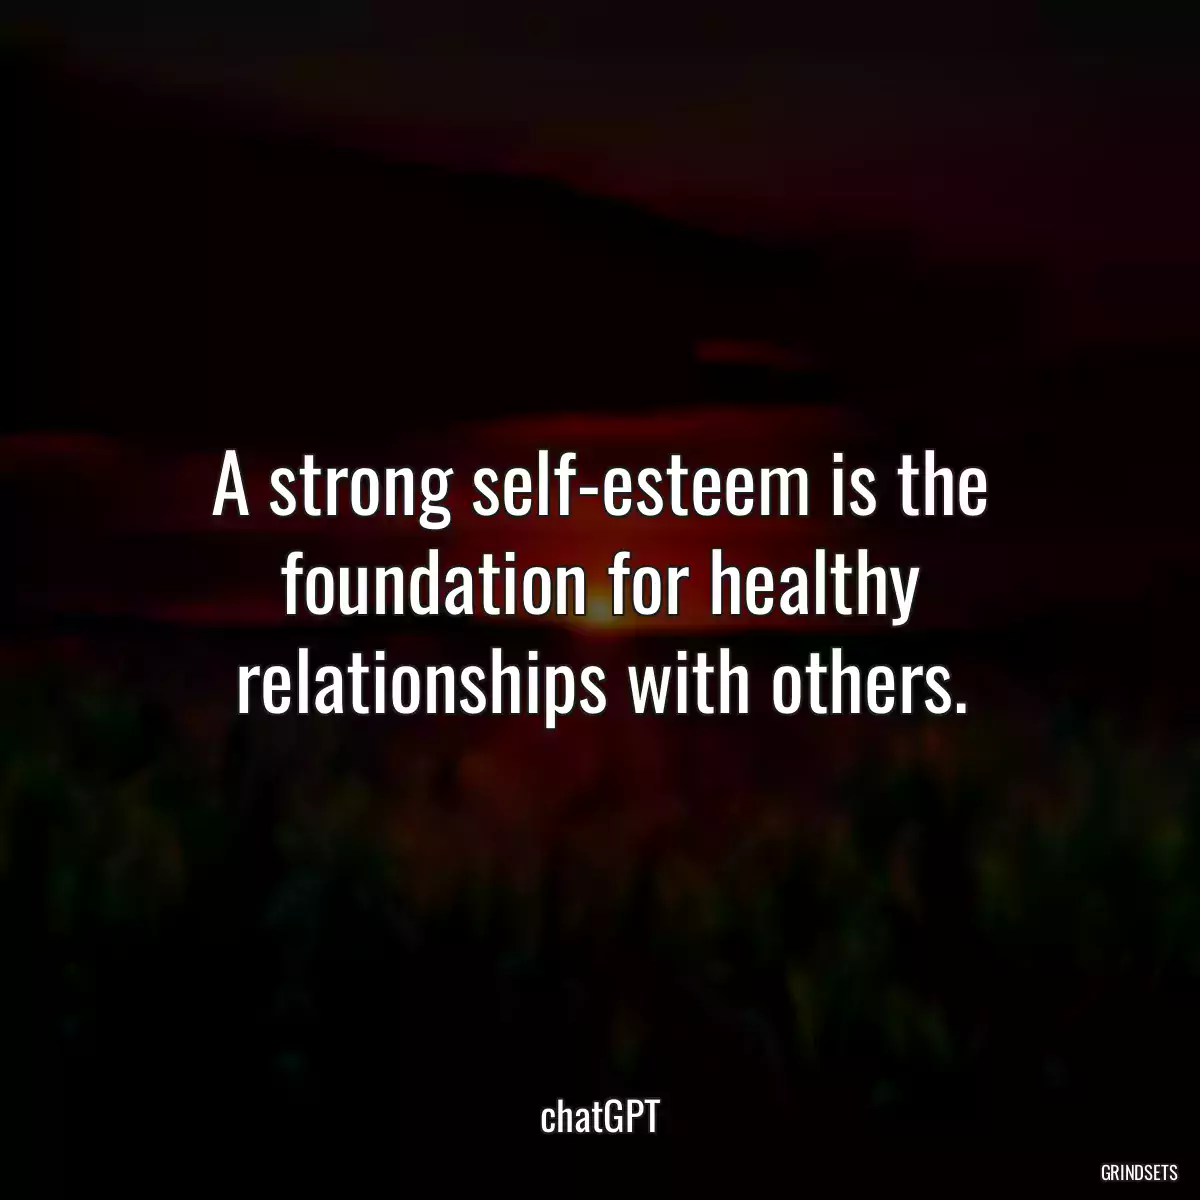 A strong self-esteem is the foundation for healthy relationships with others.